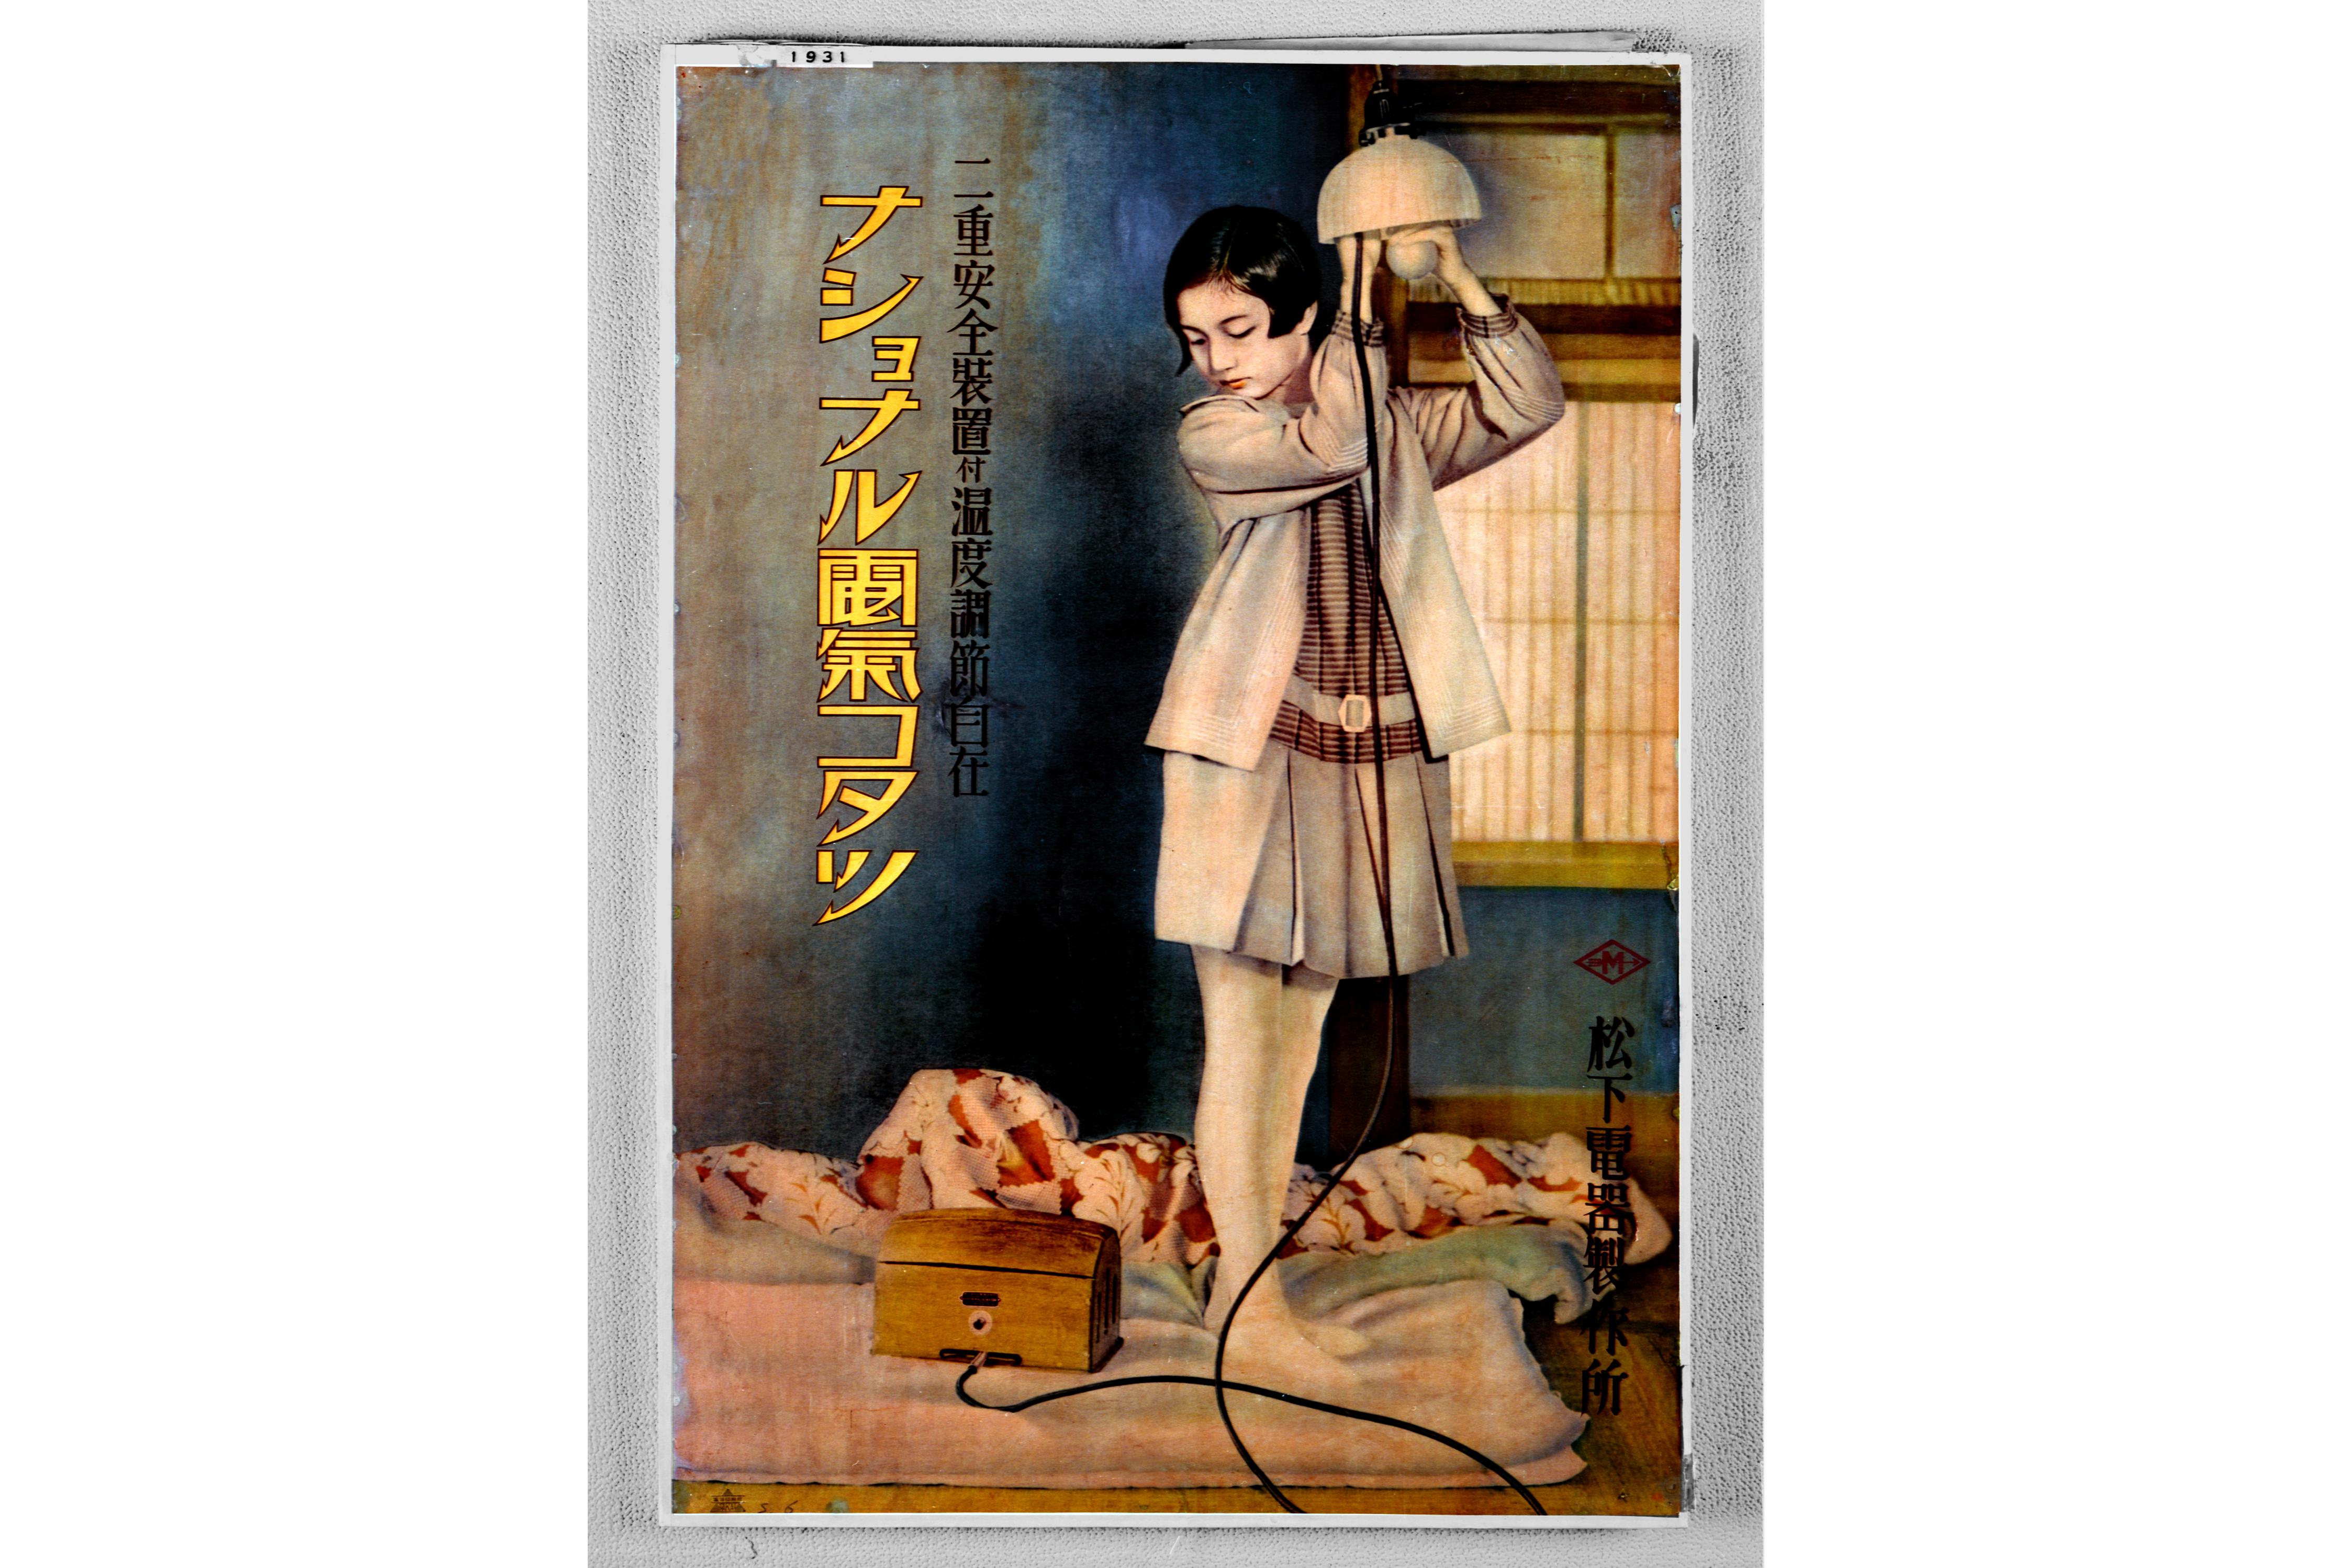 photo: an advertisement of kotatsu (1931) that depicts the 